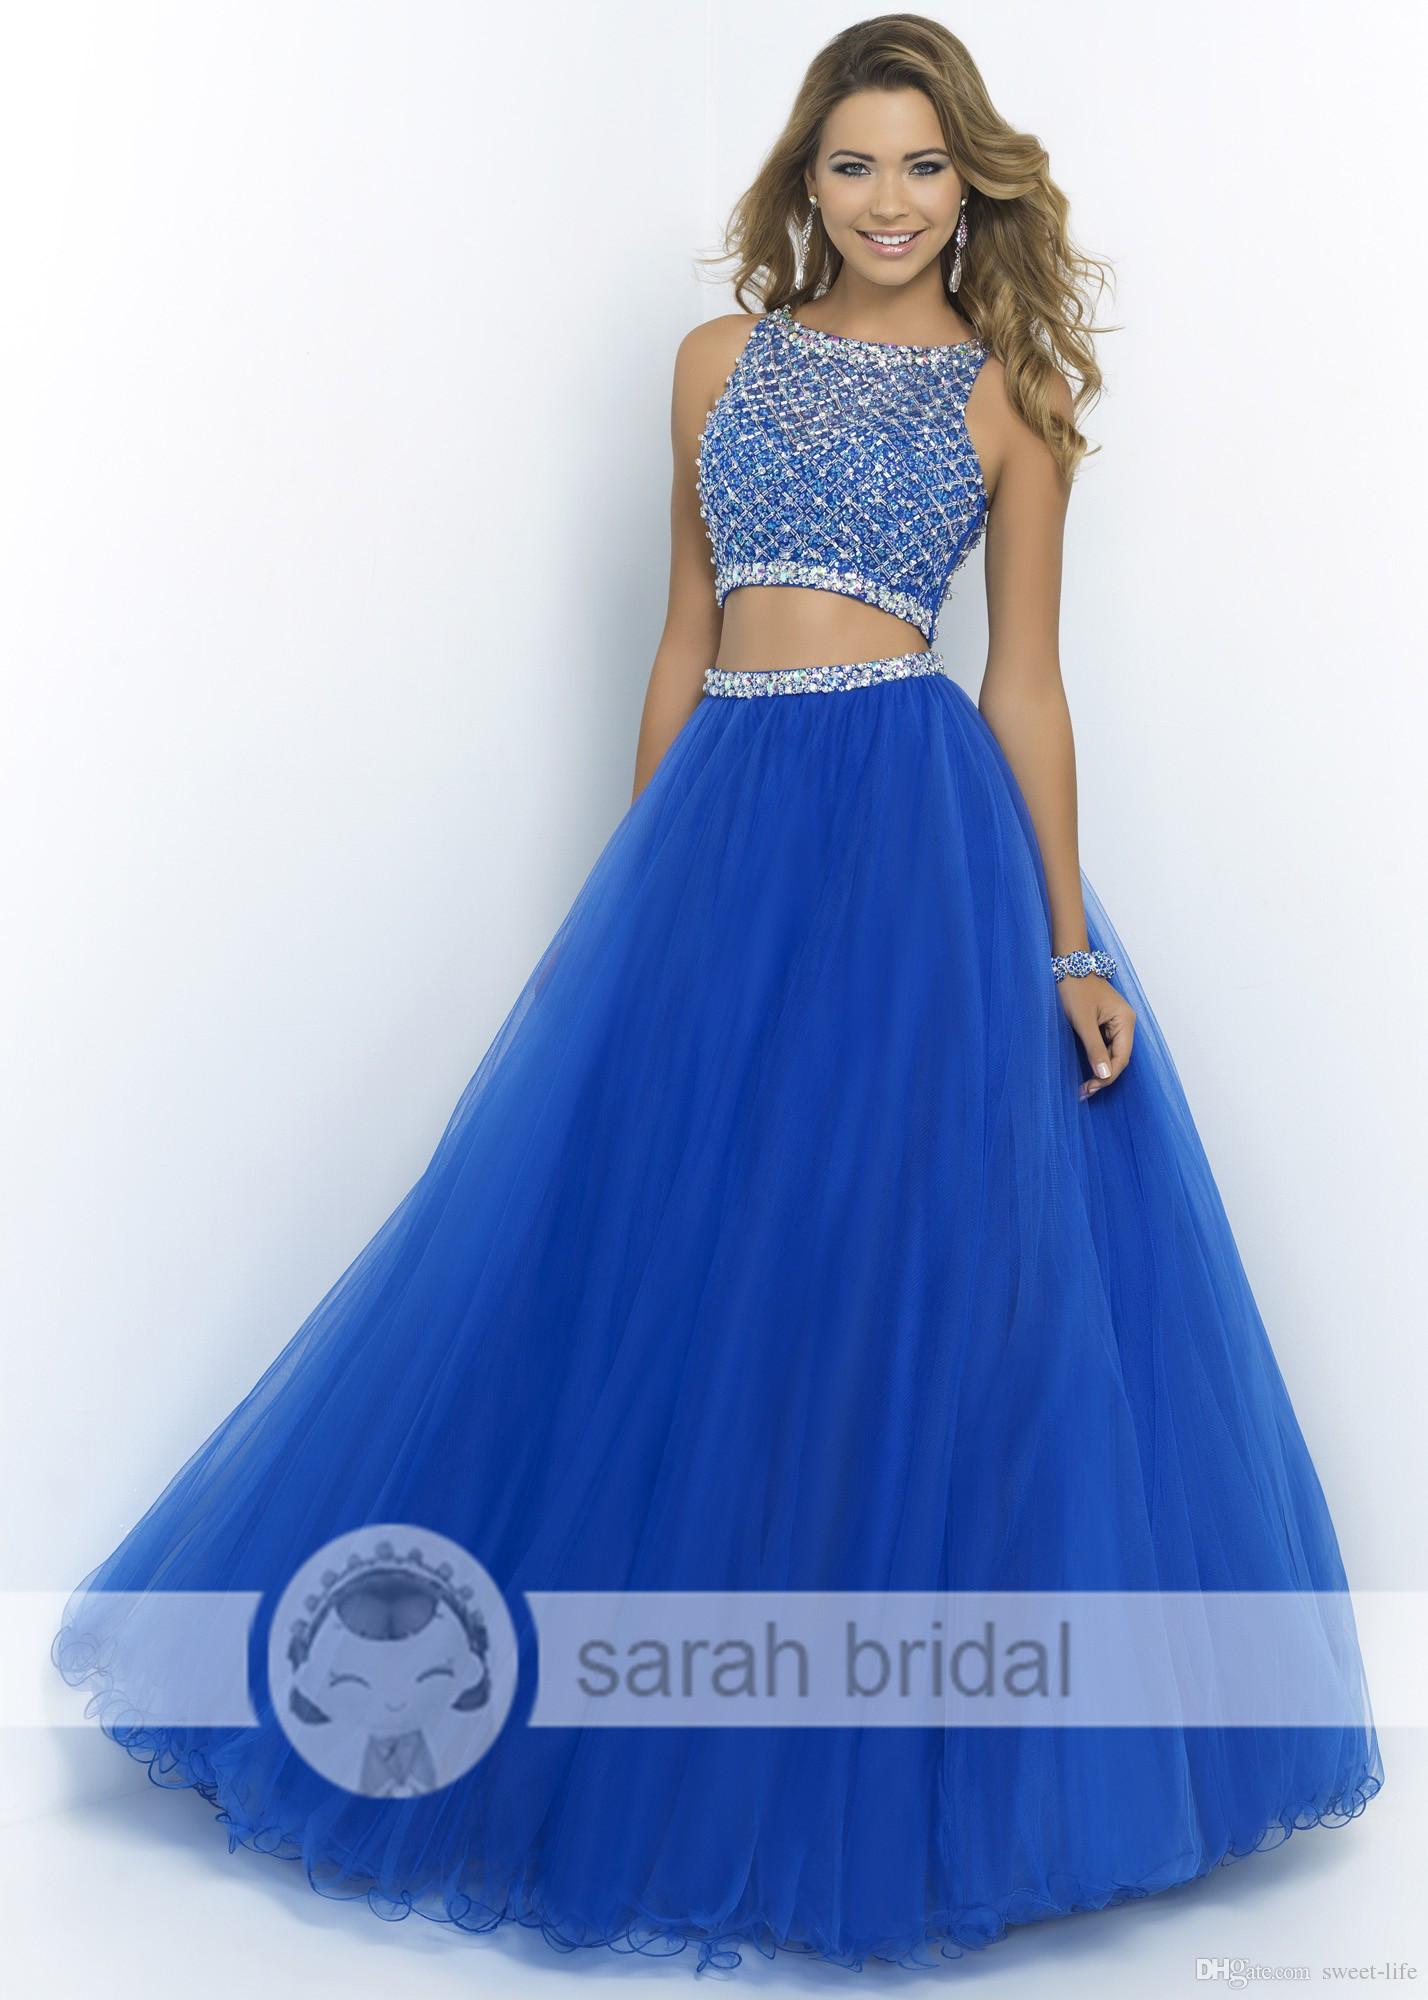 Two Piece Cheap Prom Dresses : New Fashion Collection